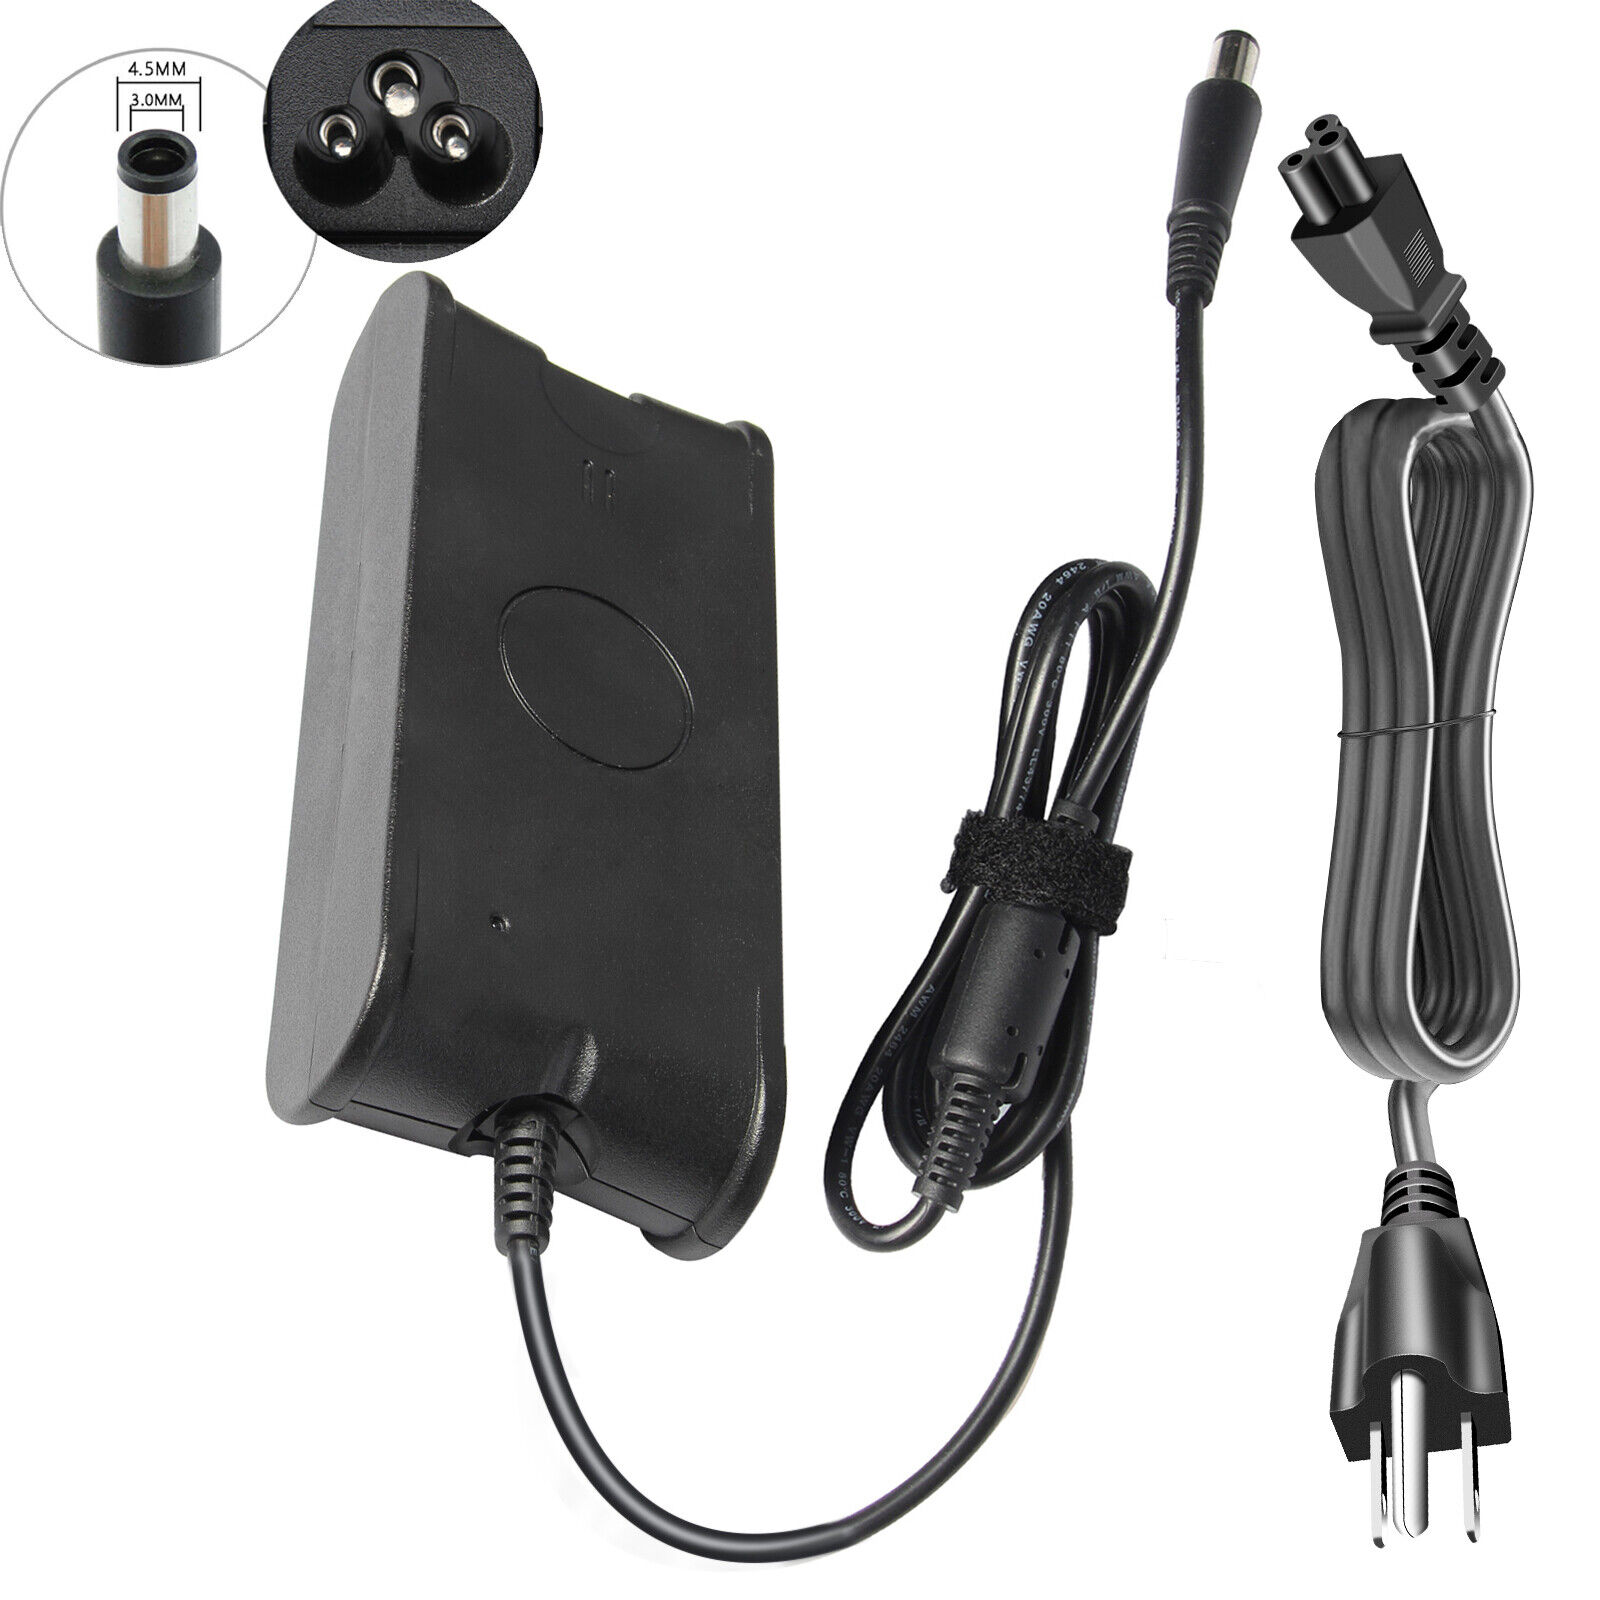 AC Adapter Power Supply Cord Cable Charger for Dell Latitude 3410 3490 Laptop PC